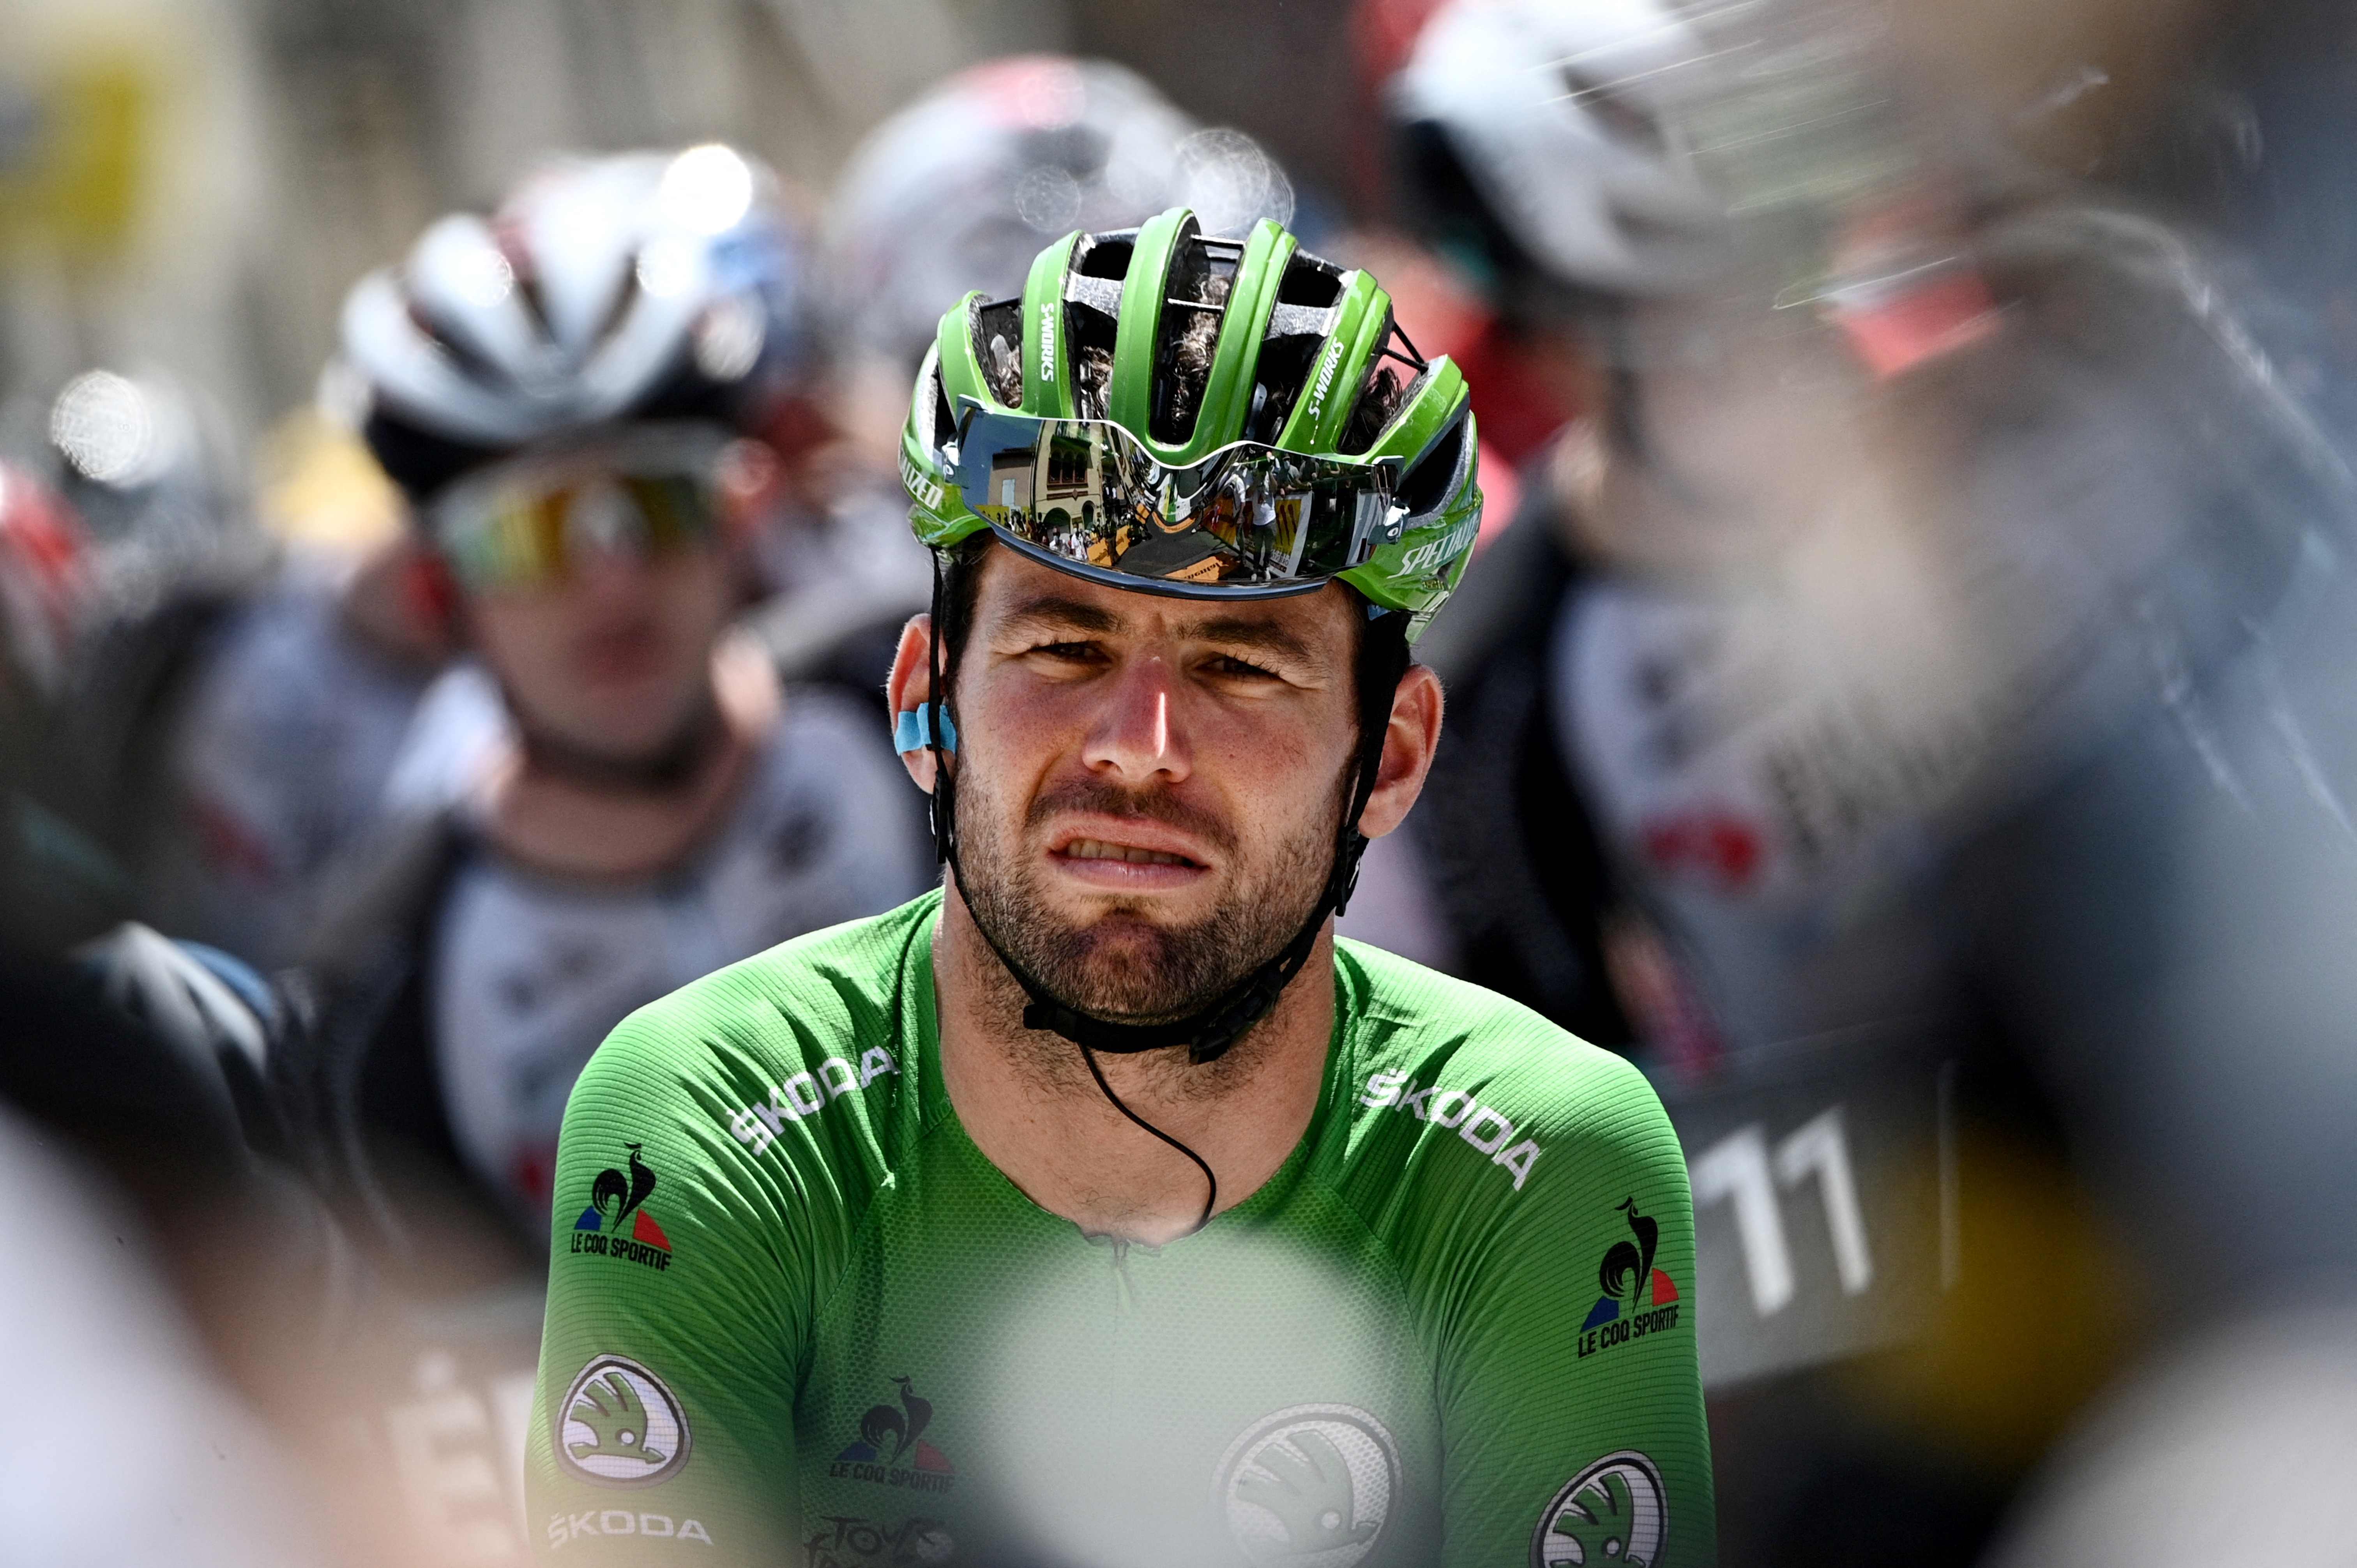 Mark Cavendish will not be at the Tour de France this year